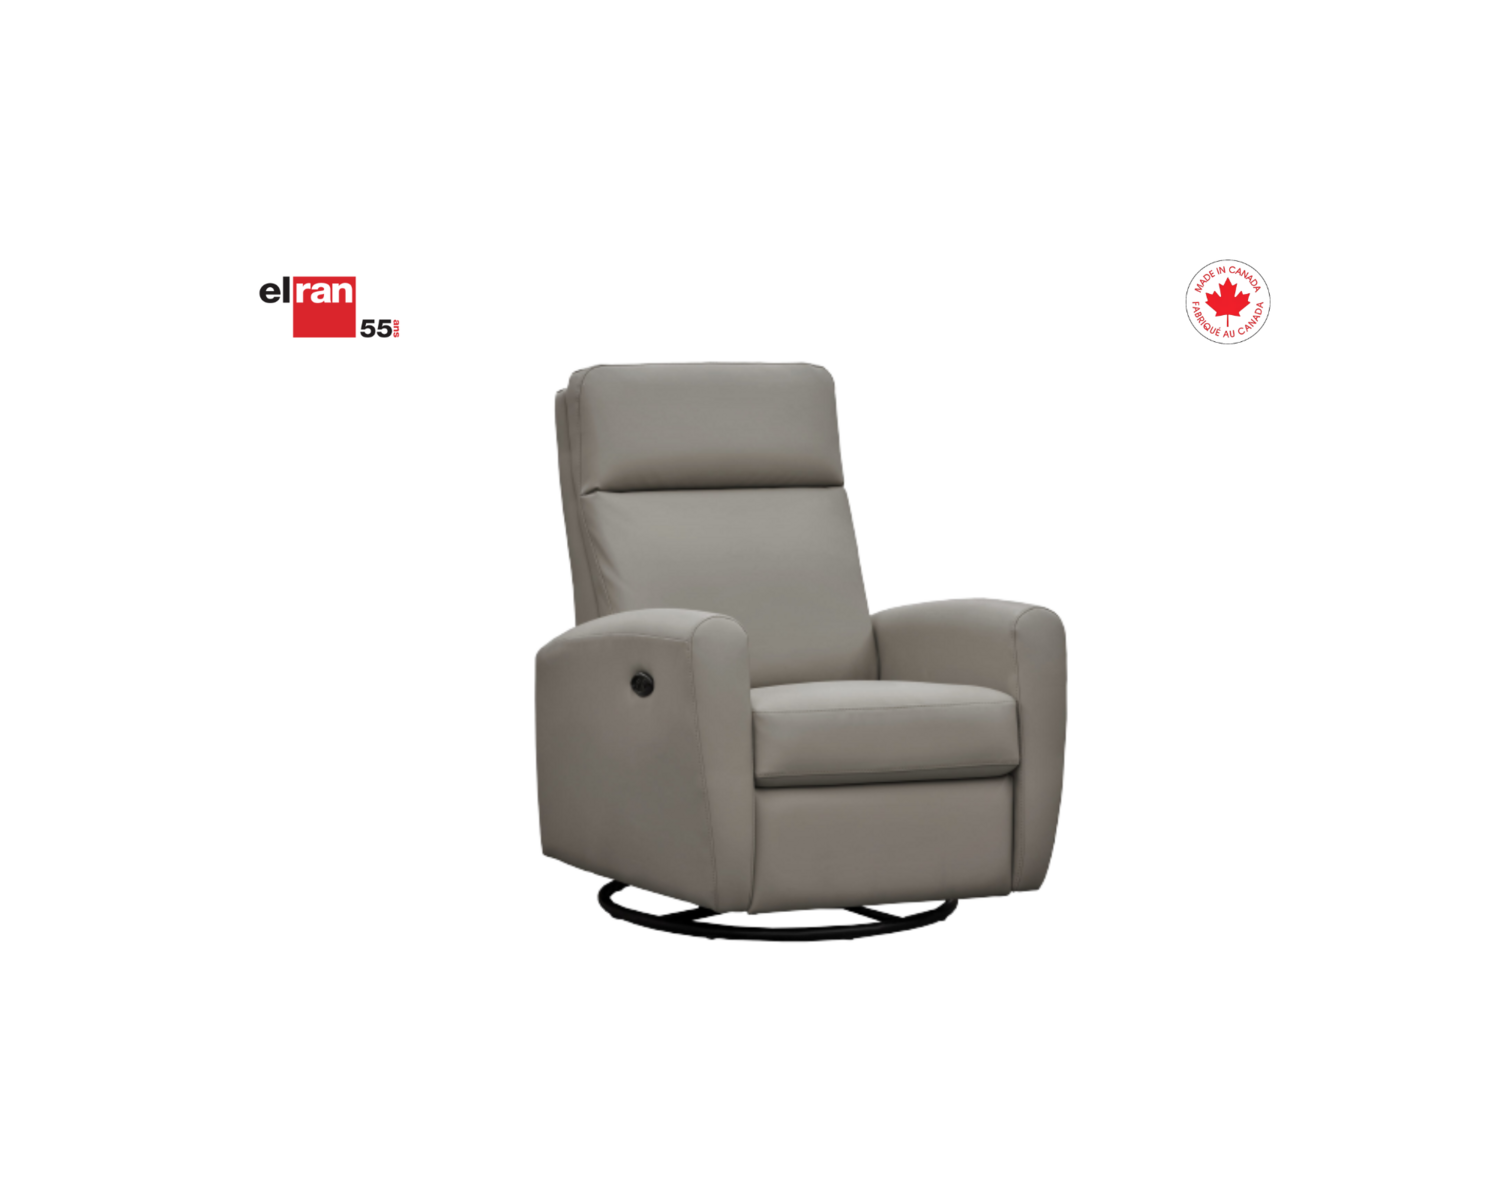 Elran furniture- Fauteuil inclinable - TAXES PAYÉES.